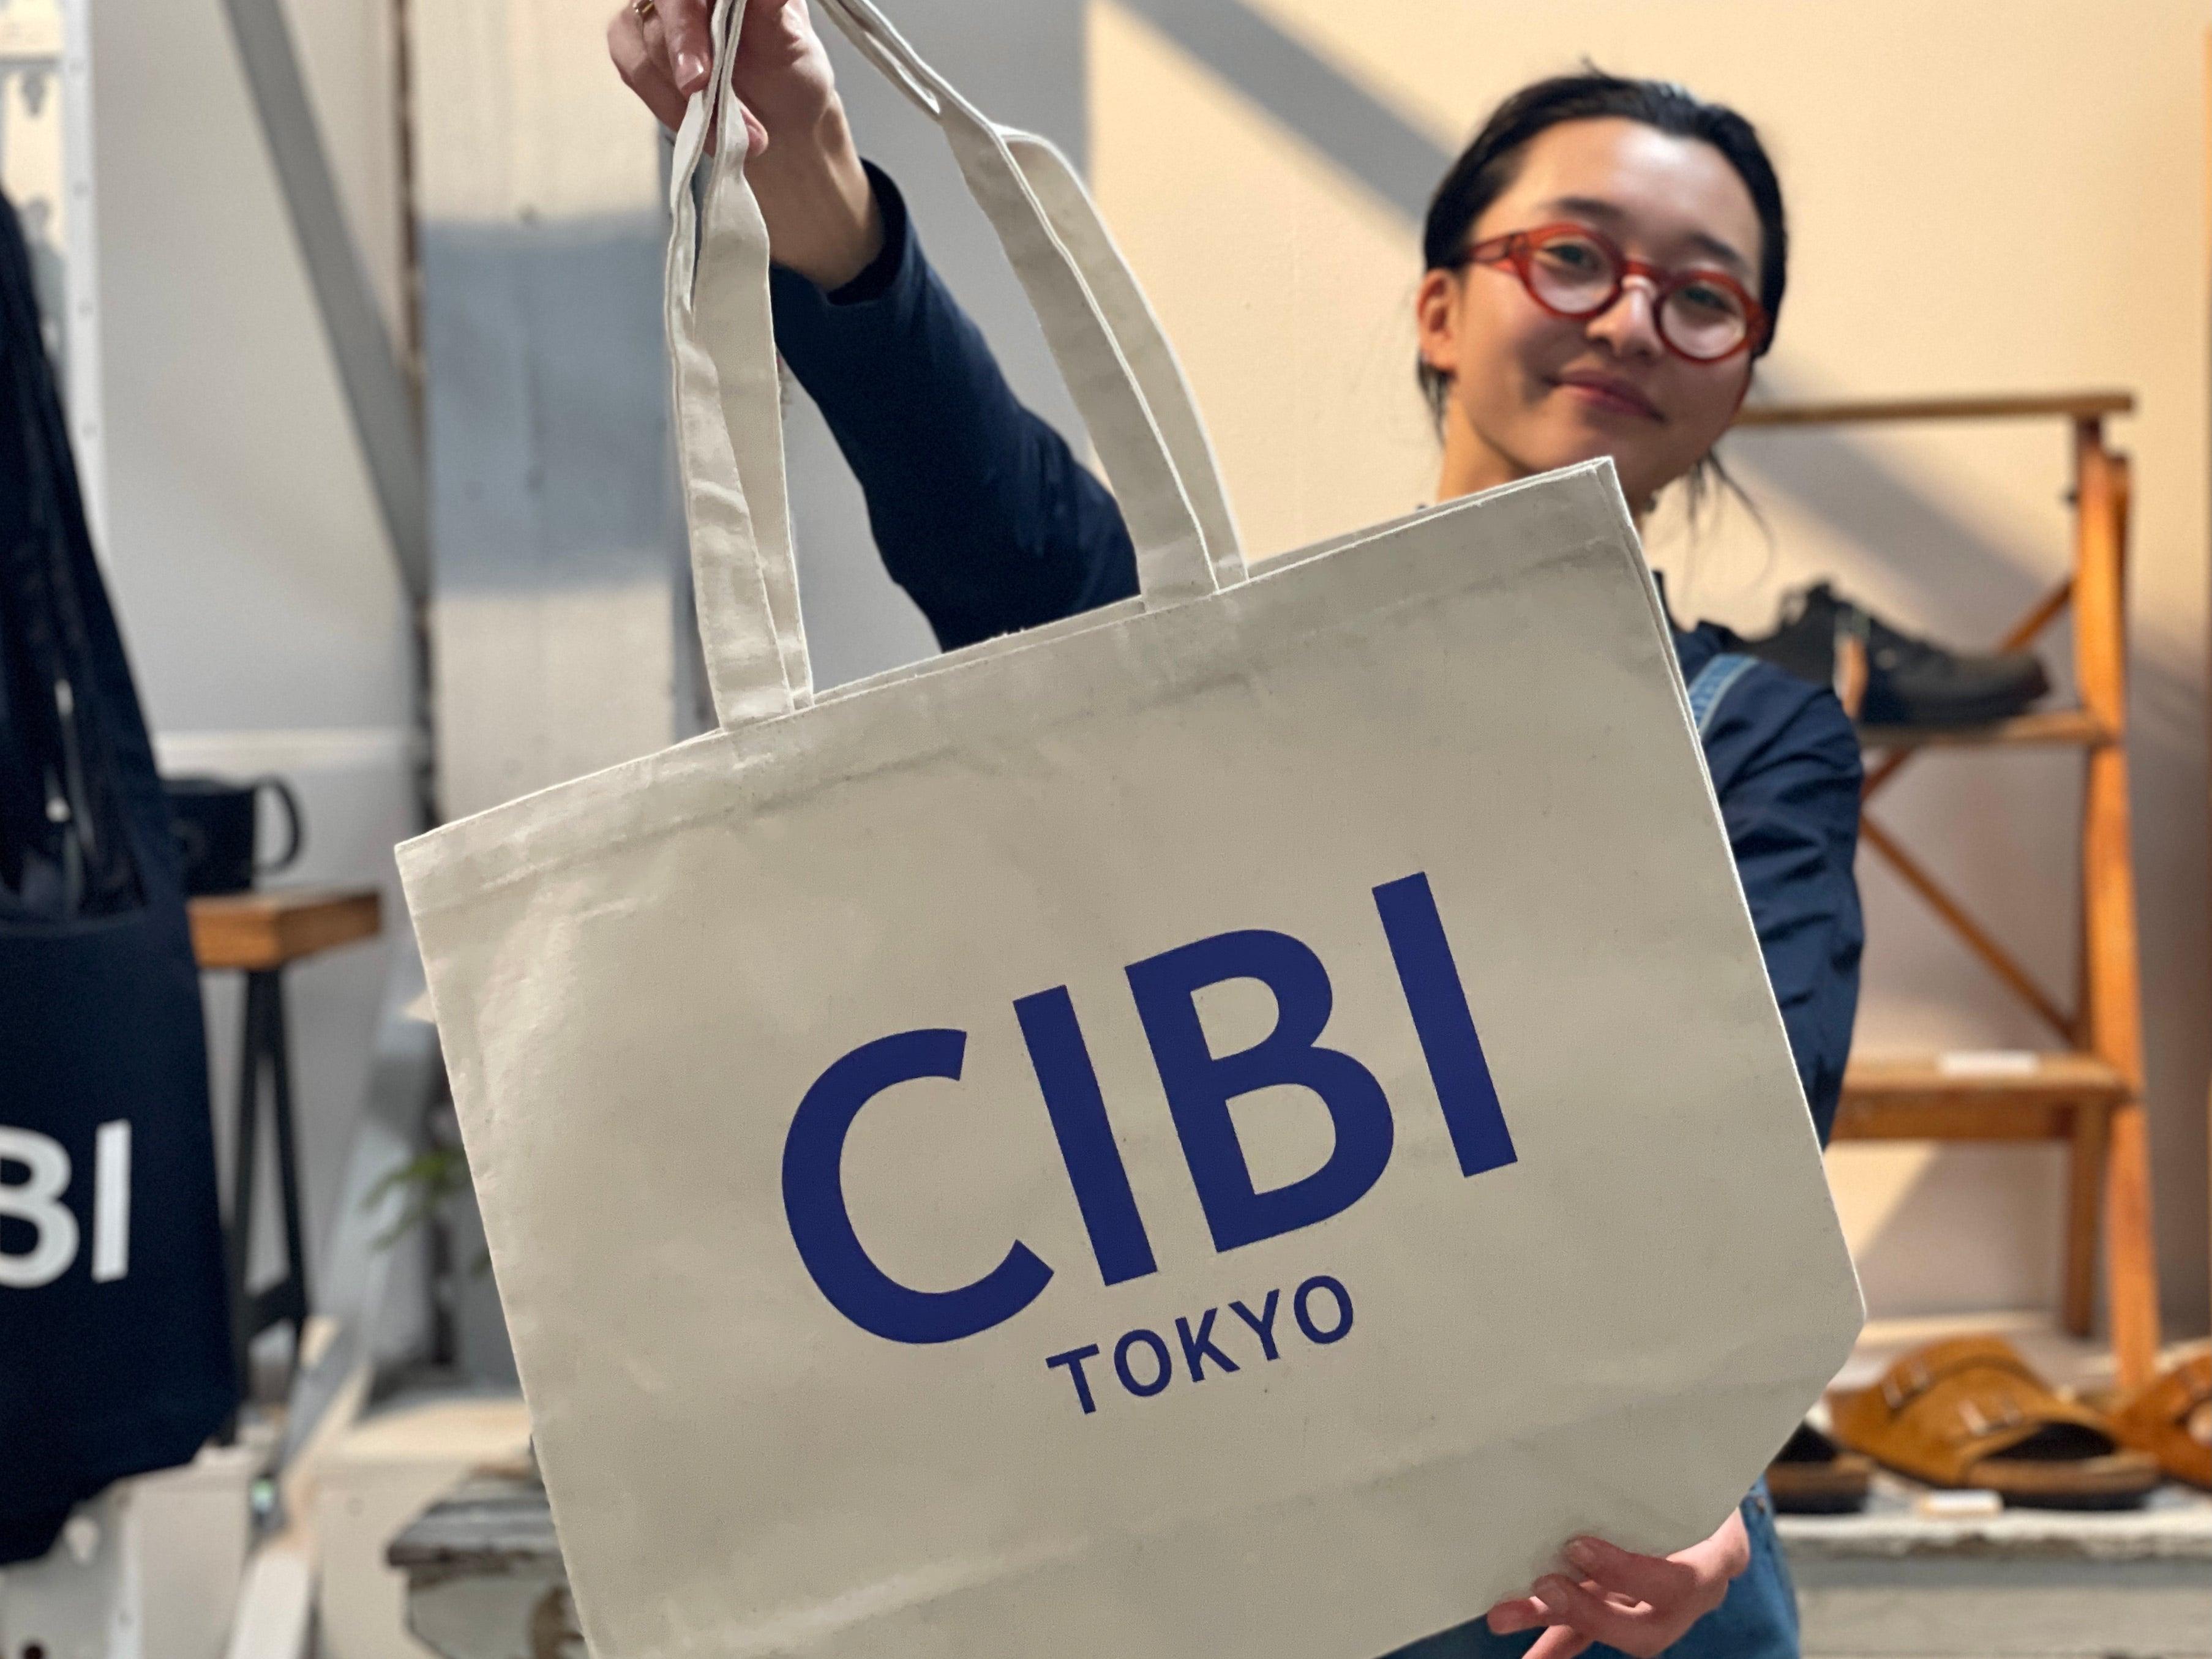 Meet our Member CIBI Information Inc., Philippines